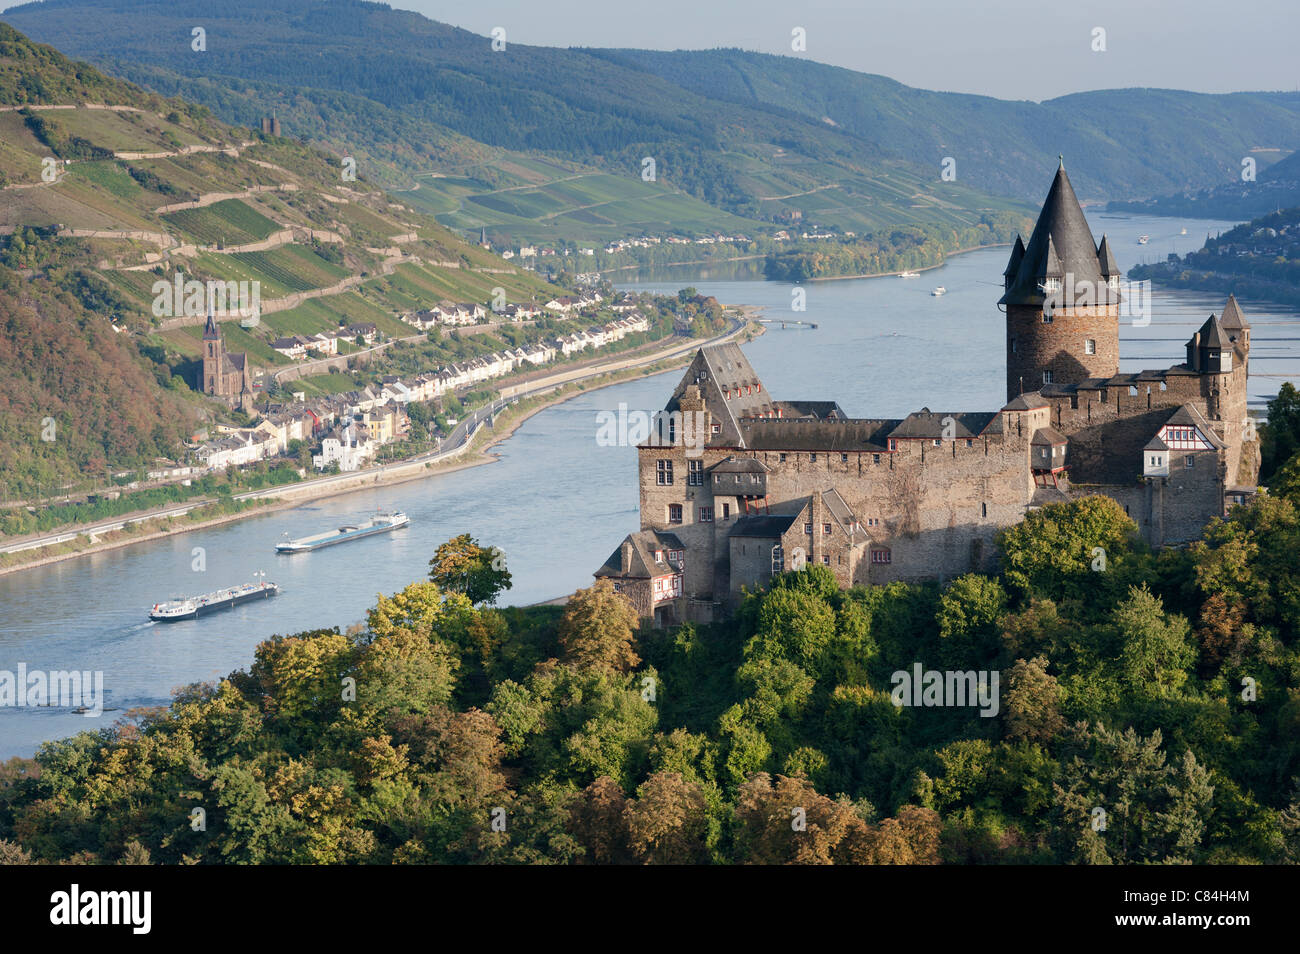 View of Burg castle Stahleck in Bacharach village on Romantic River Rhine in Germany Stock Photo